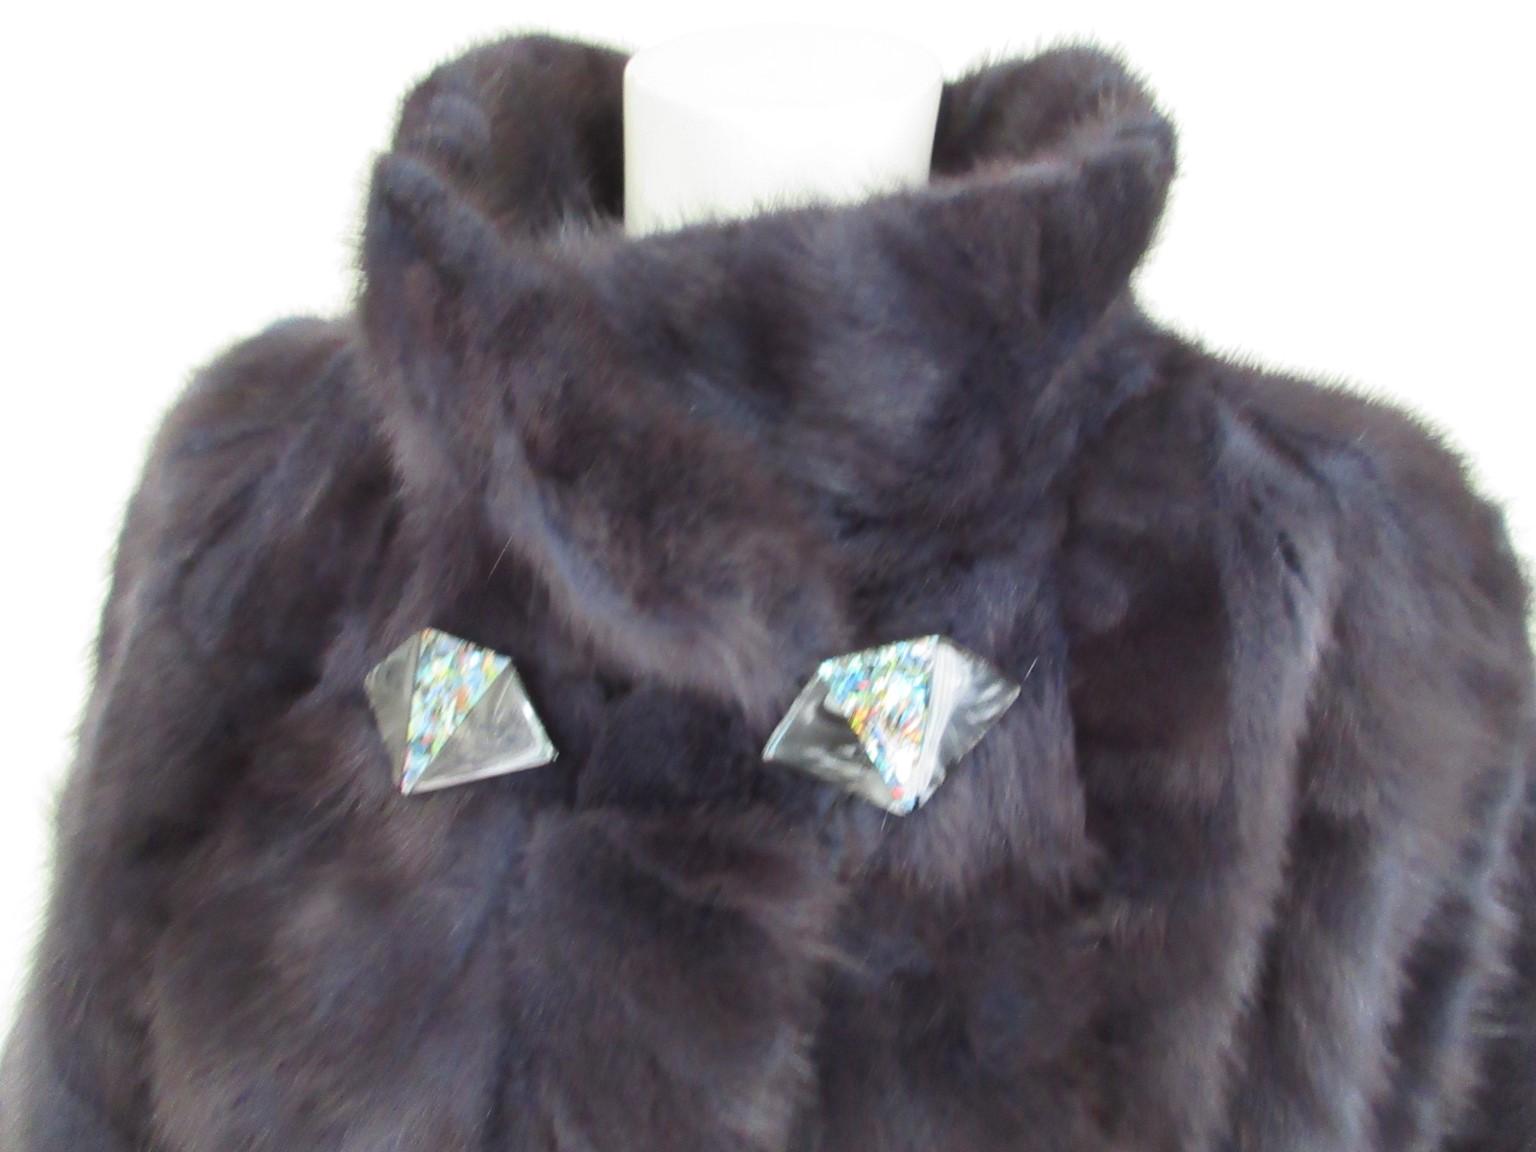 This coat is made of dyed blue soft mink fur

We offer more exclusive fur items, view our frontstore

Details:
It has 2 pockets and 4 closing hooks 
2 Art deco buttons at collar
inside pocket
fully lined
Its in pristine condition
size fits as